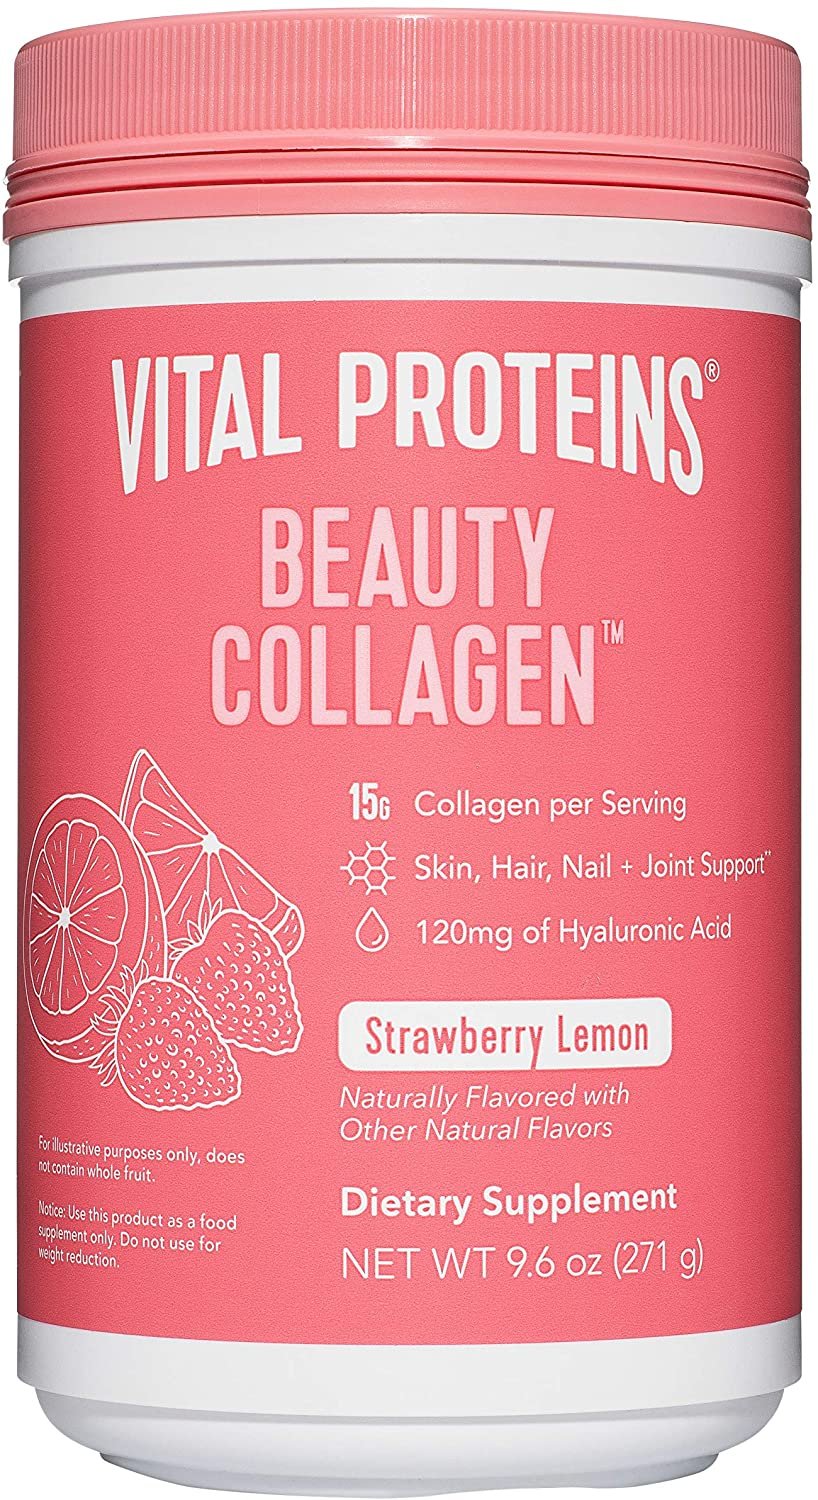 Vital Proteins Beauty Collagen Peptides